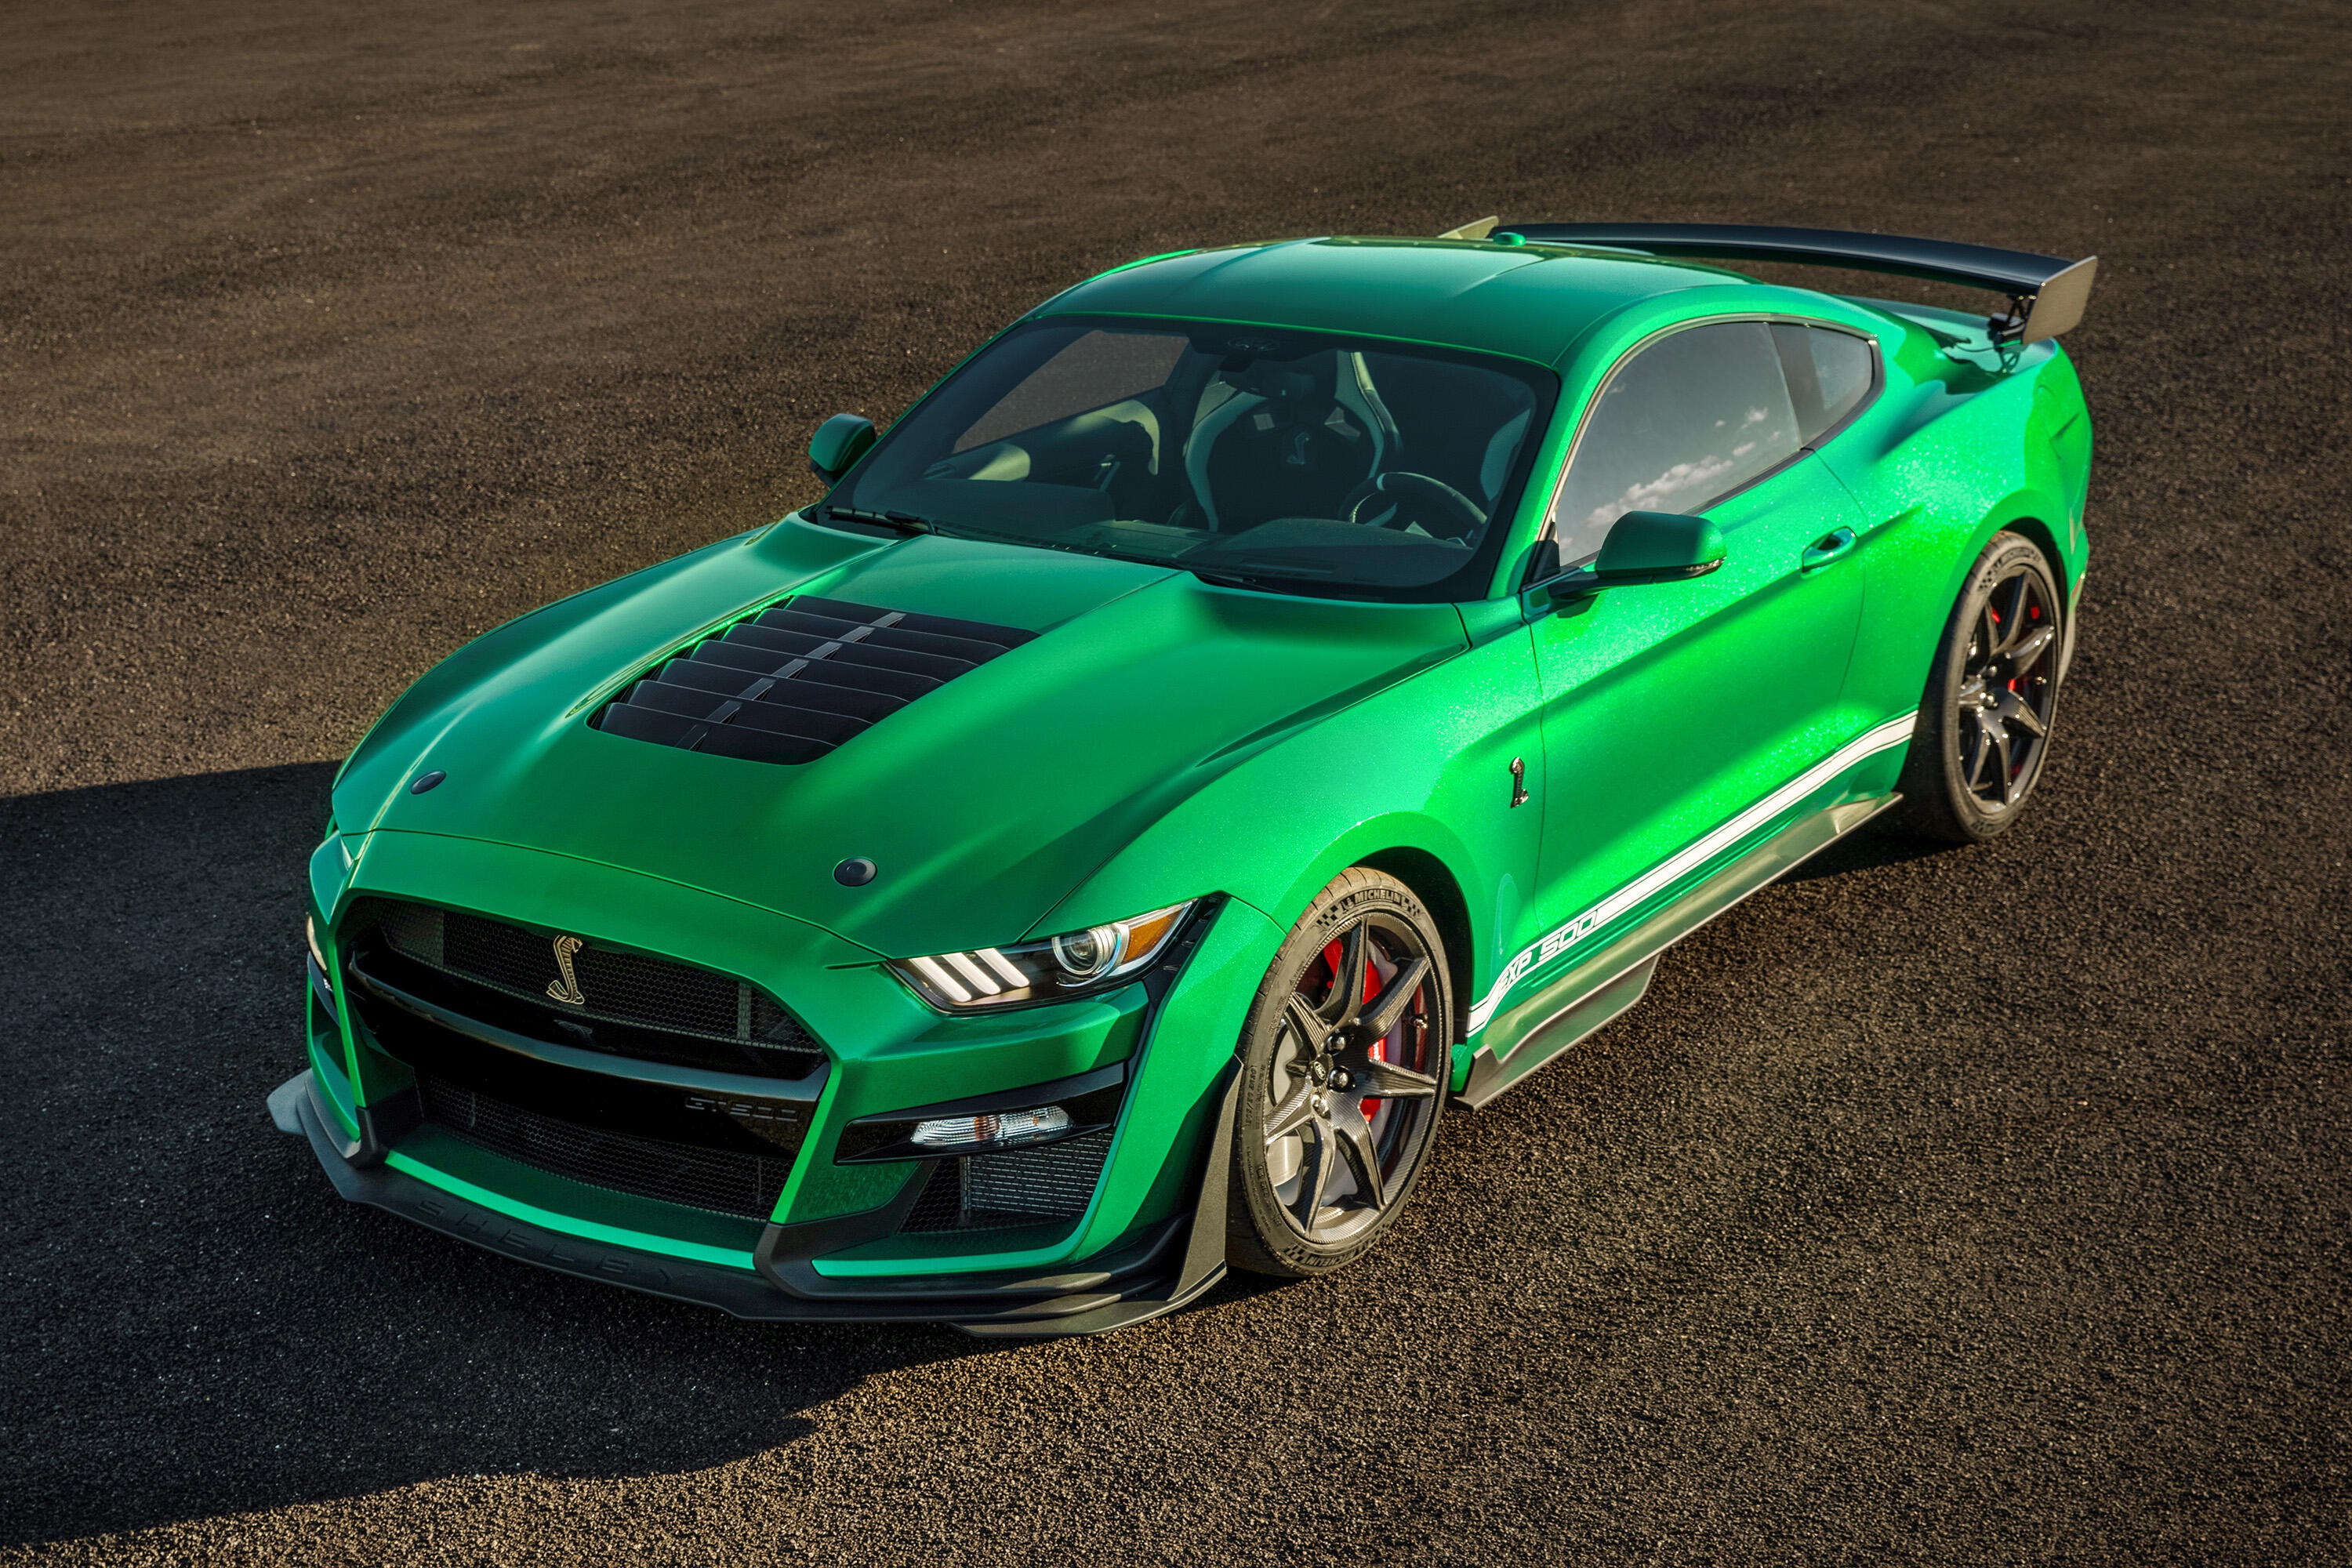 Car Ford Ford Mustang Ford Mustang Shelby Gt500 Green Car Muscle Car Vehicle 3000x2000